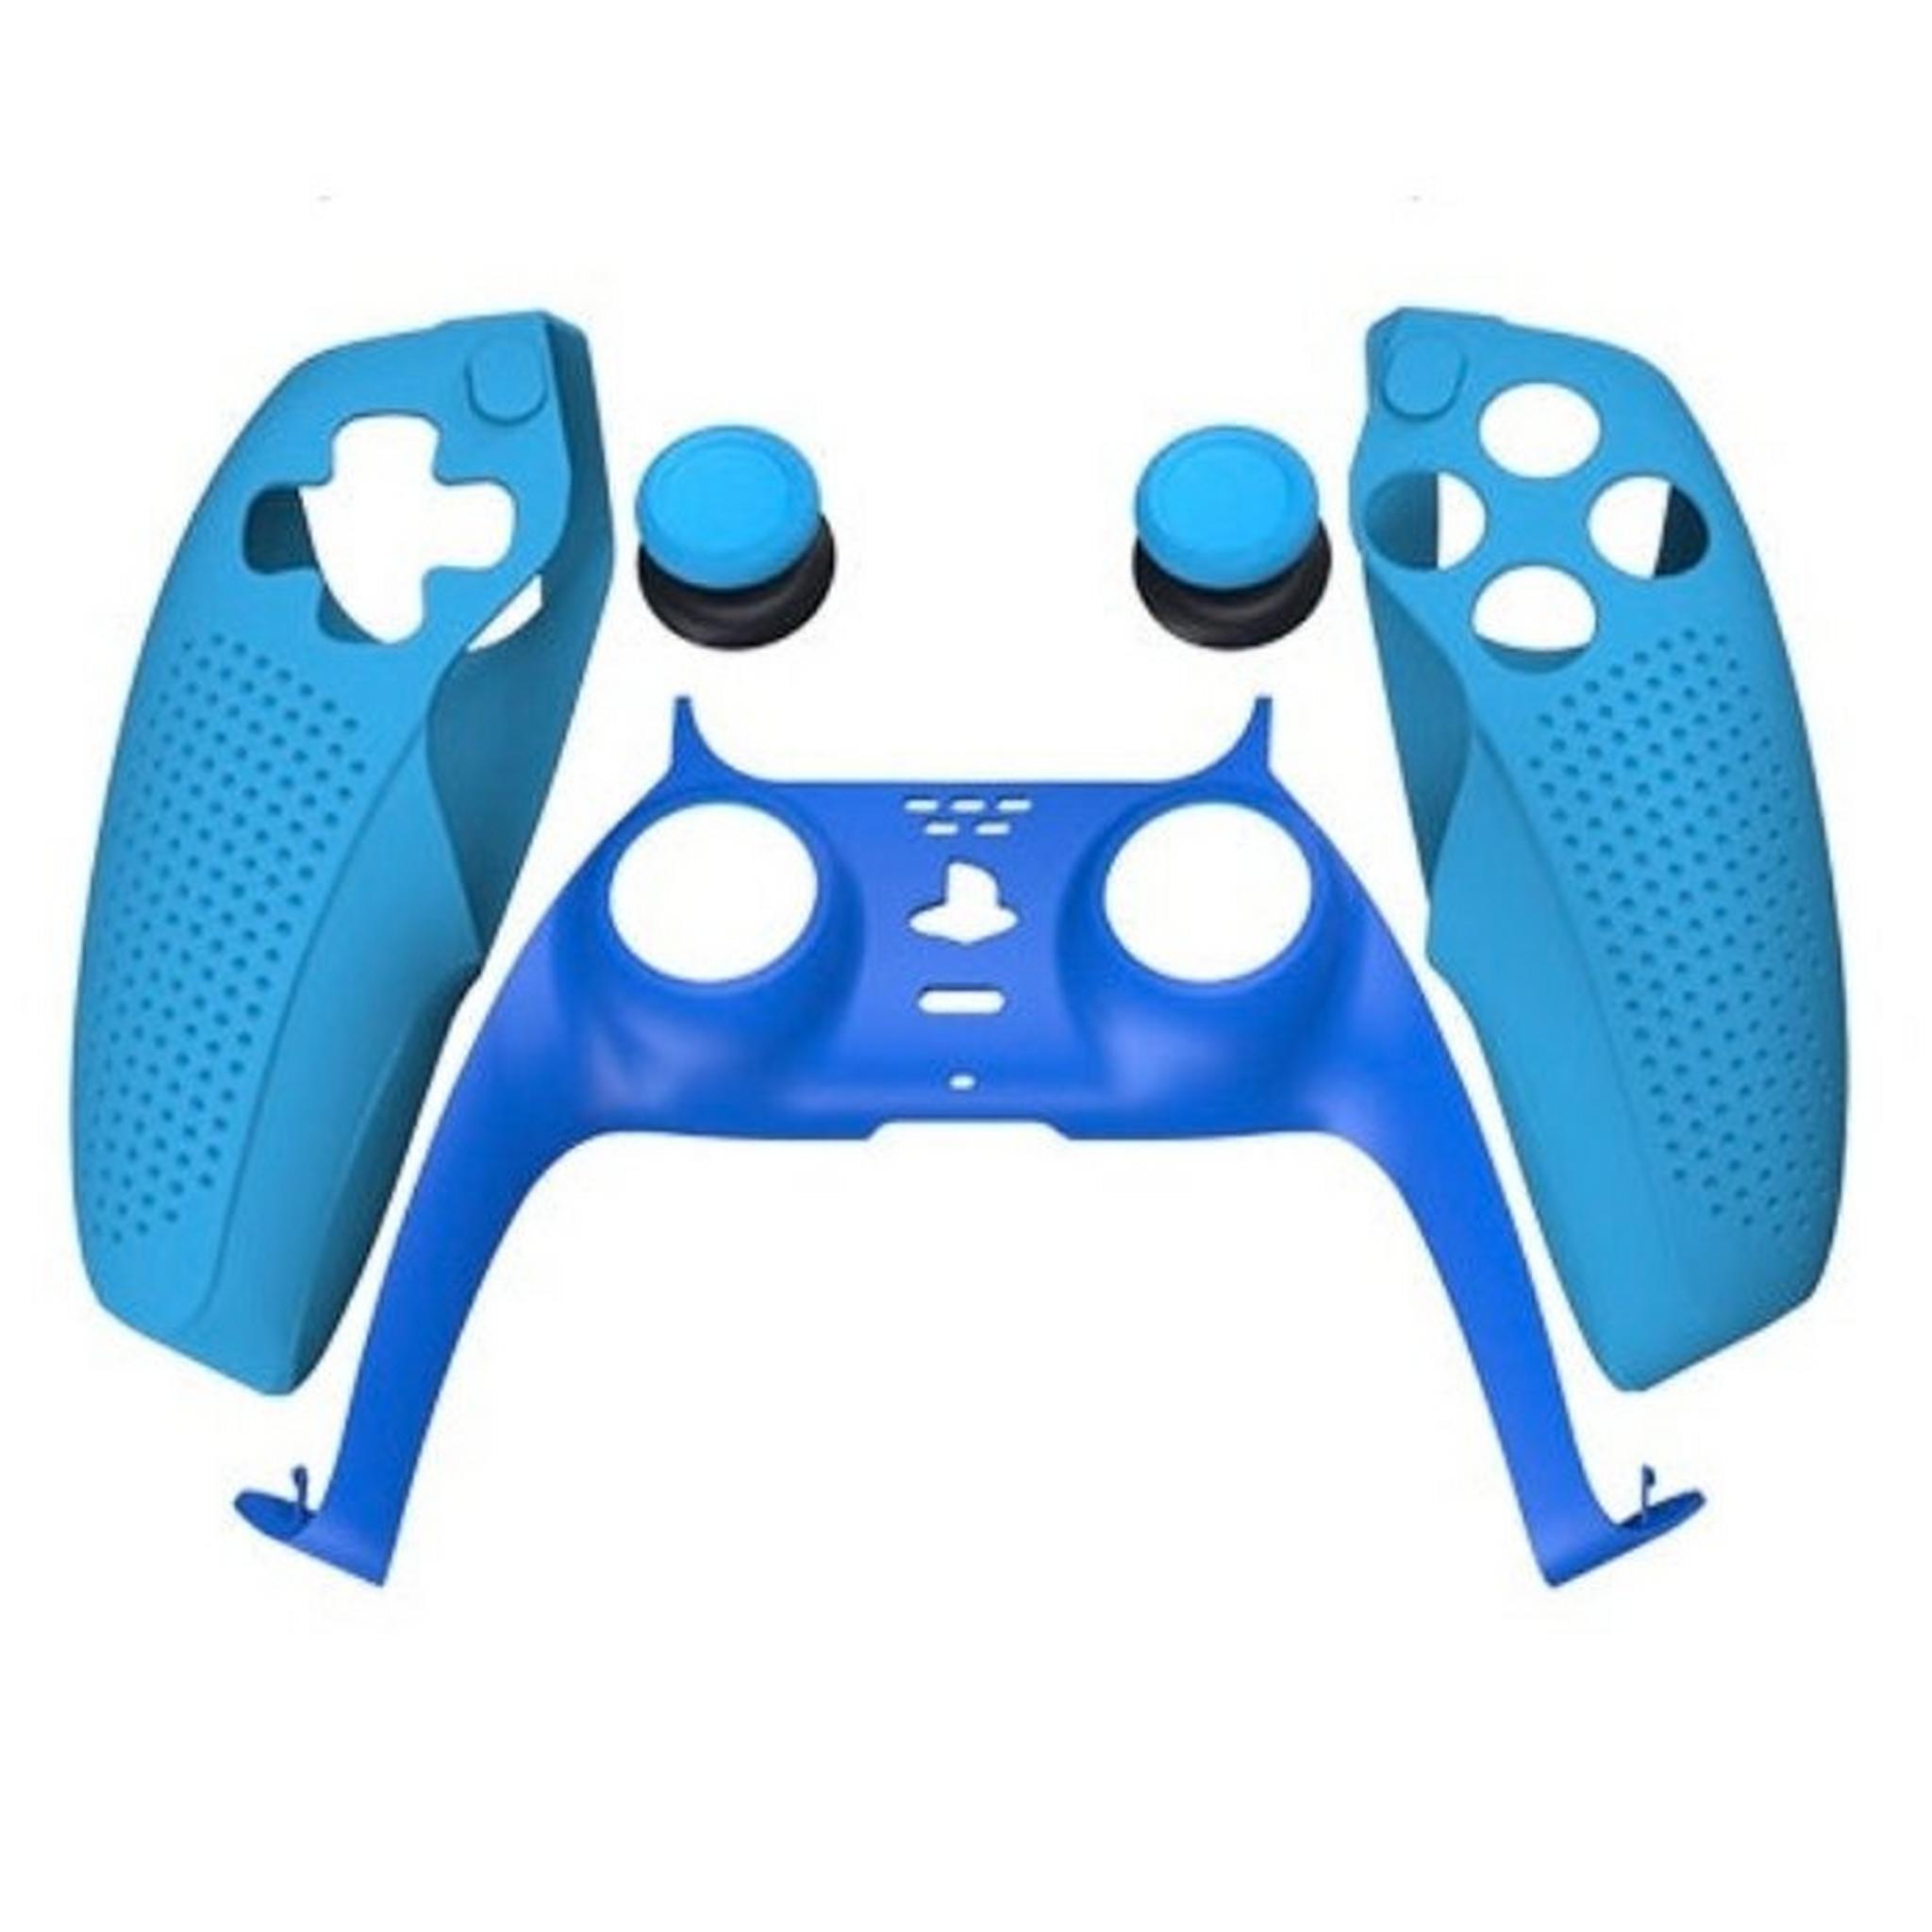 Dobe 3 In 1 Protection Kit For PS5 Controller - Blue